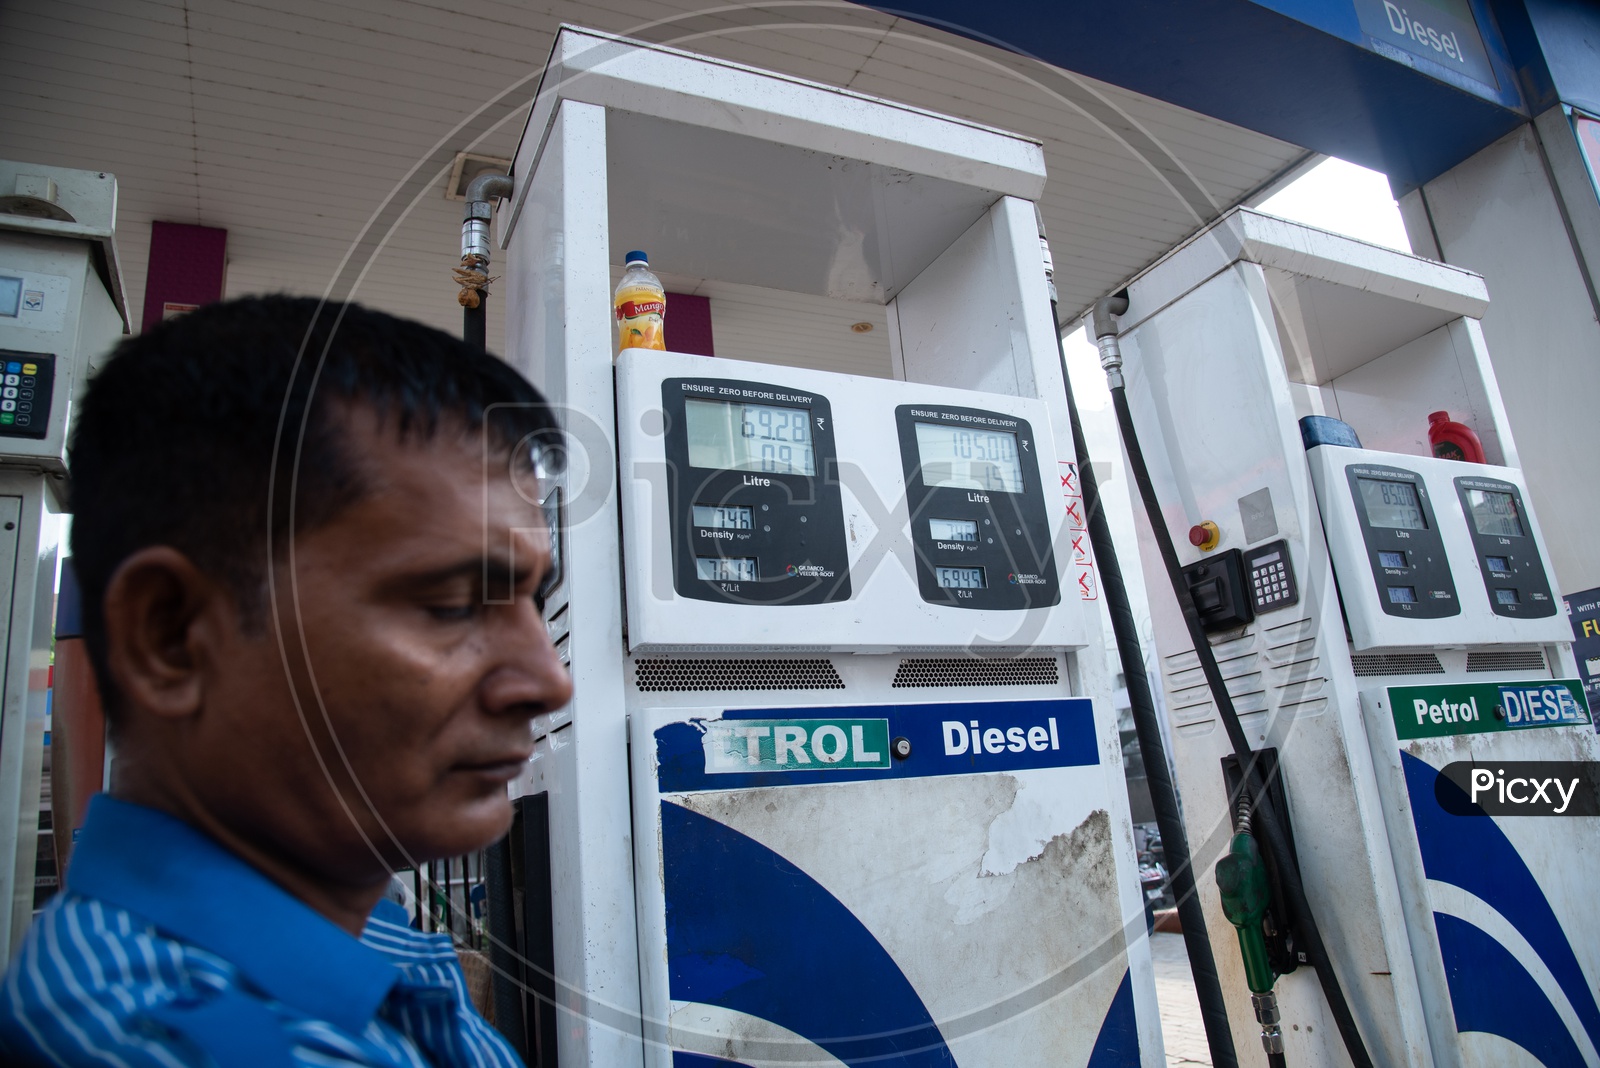 Petrol Station Worker With Fuel Teller Machine  In Background in a Fuel Station Or Petrol Station Or Petrol Bunk  in India With Fuel Pricing In  Display